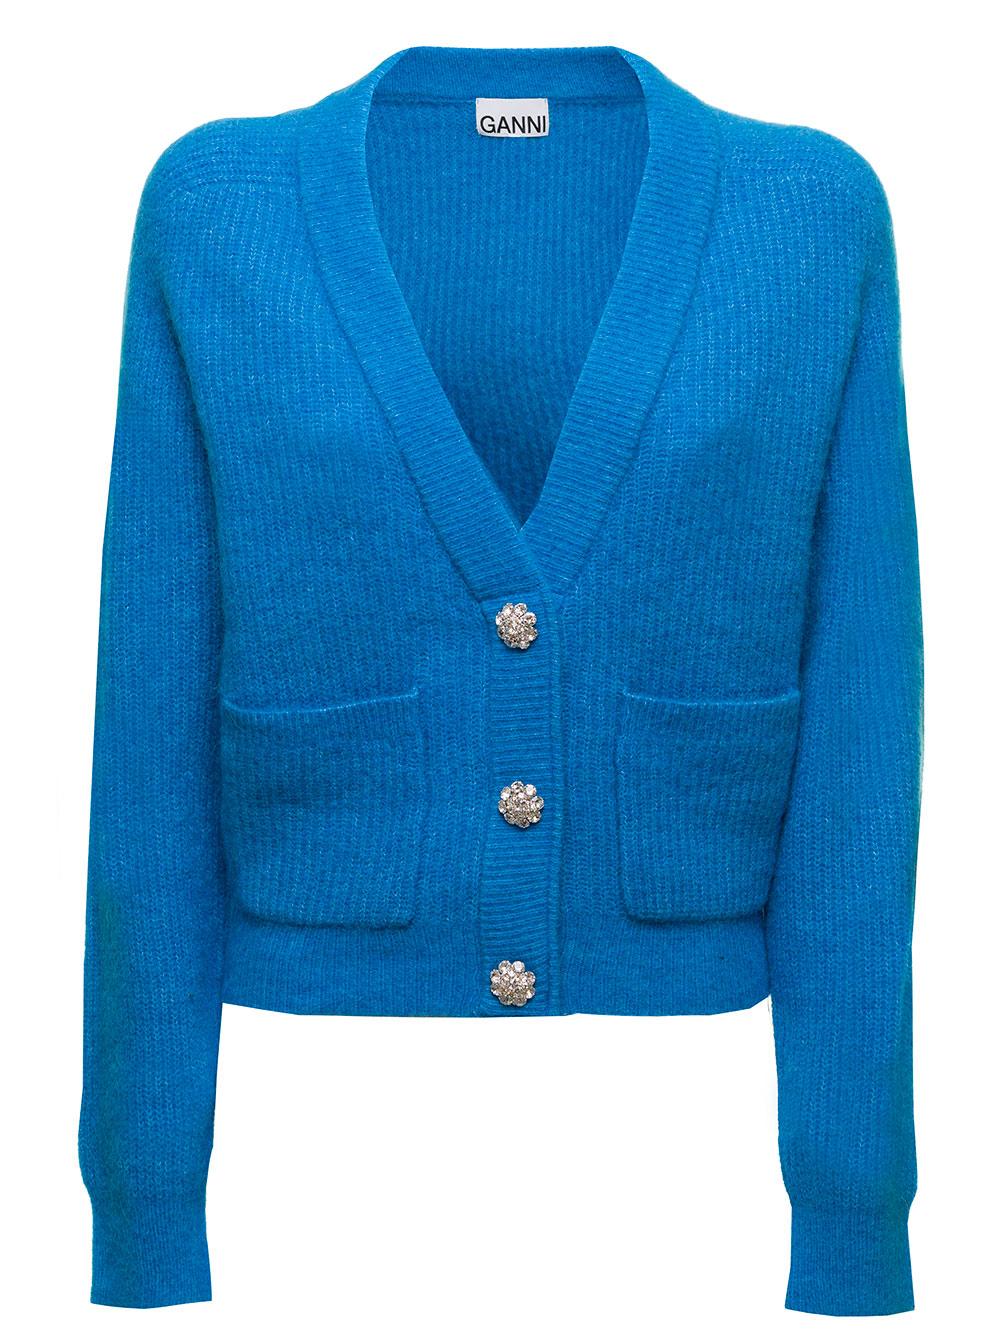 Ganni Woman's Light E Merino Wool Blend Cardigan With Jewel Buttons in Blue  | Lyst